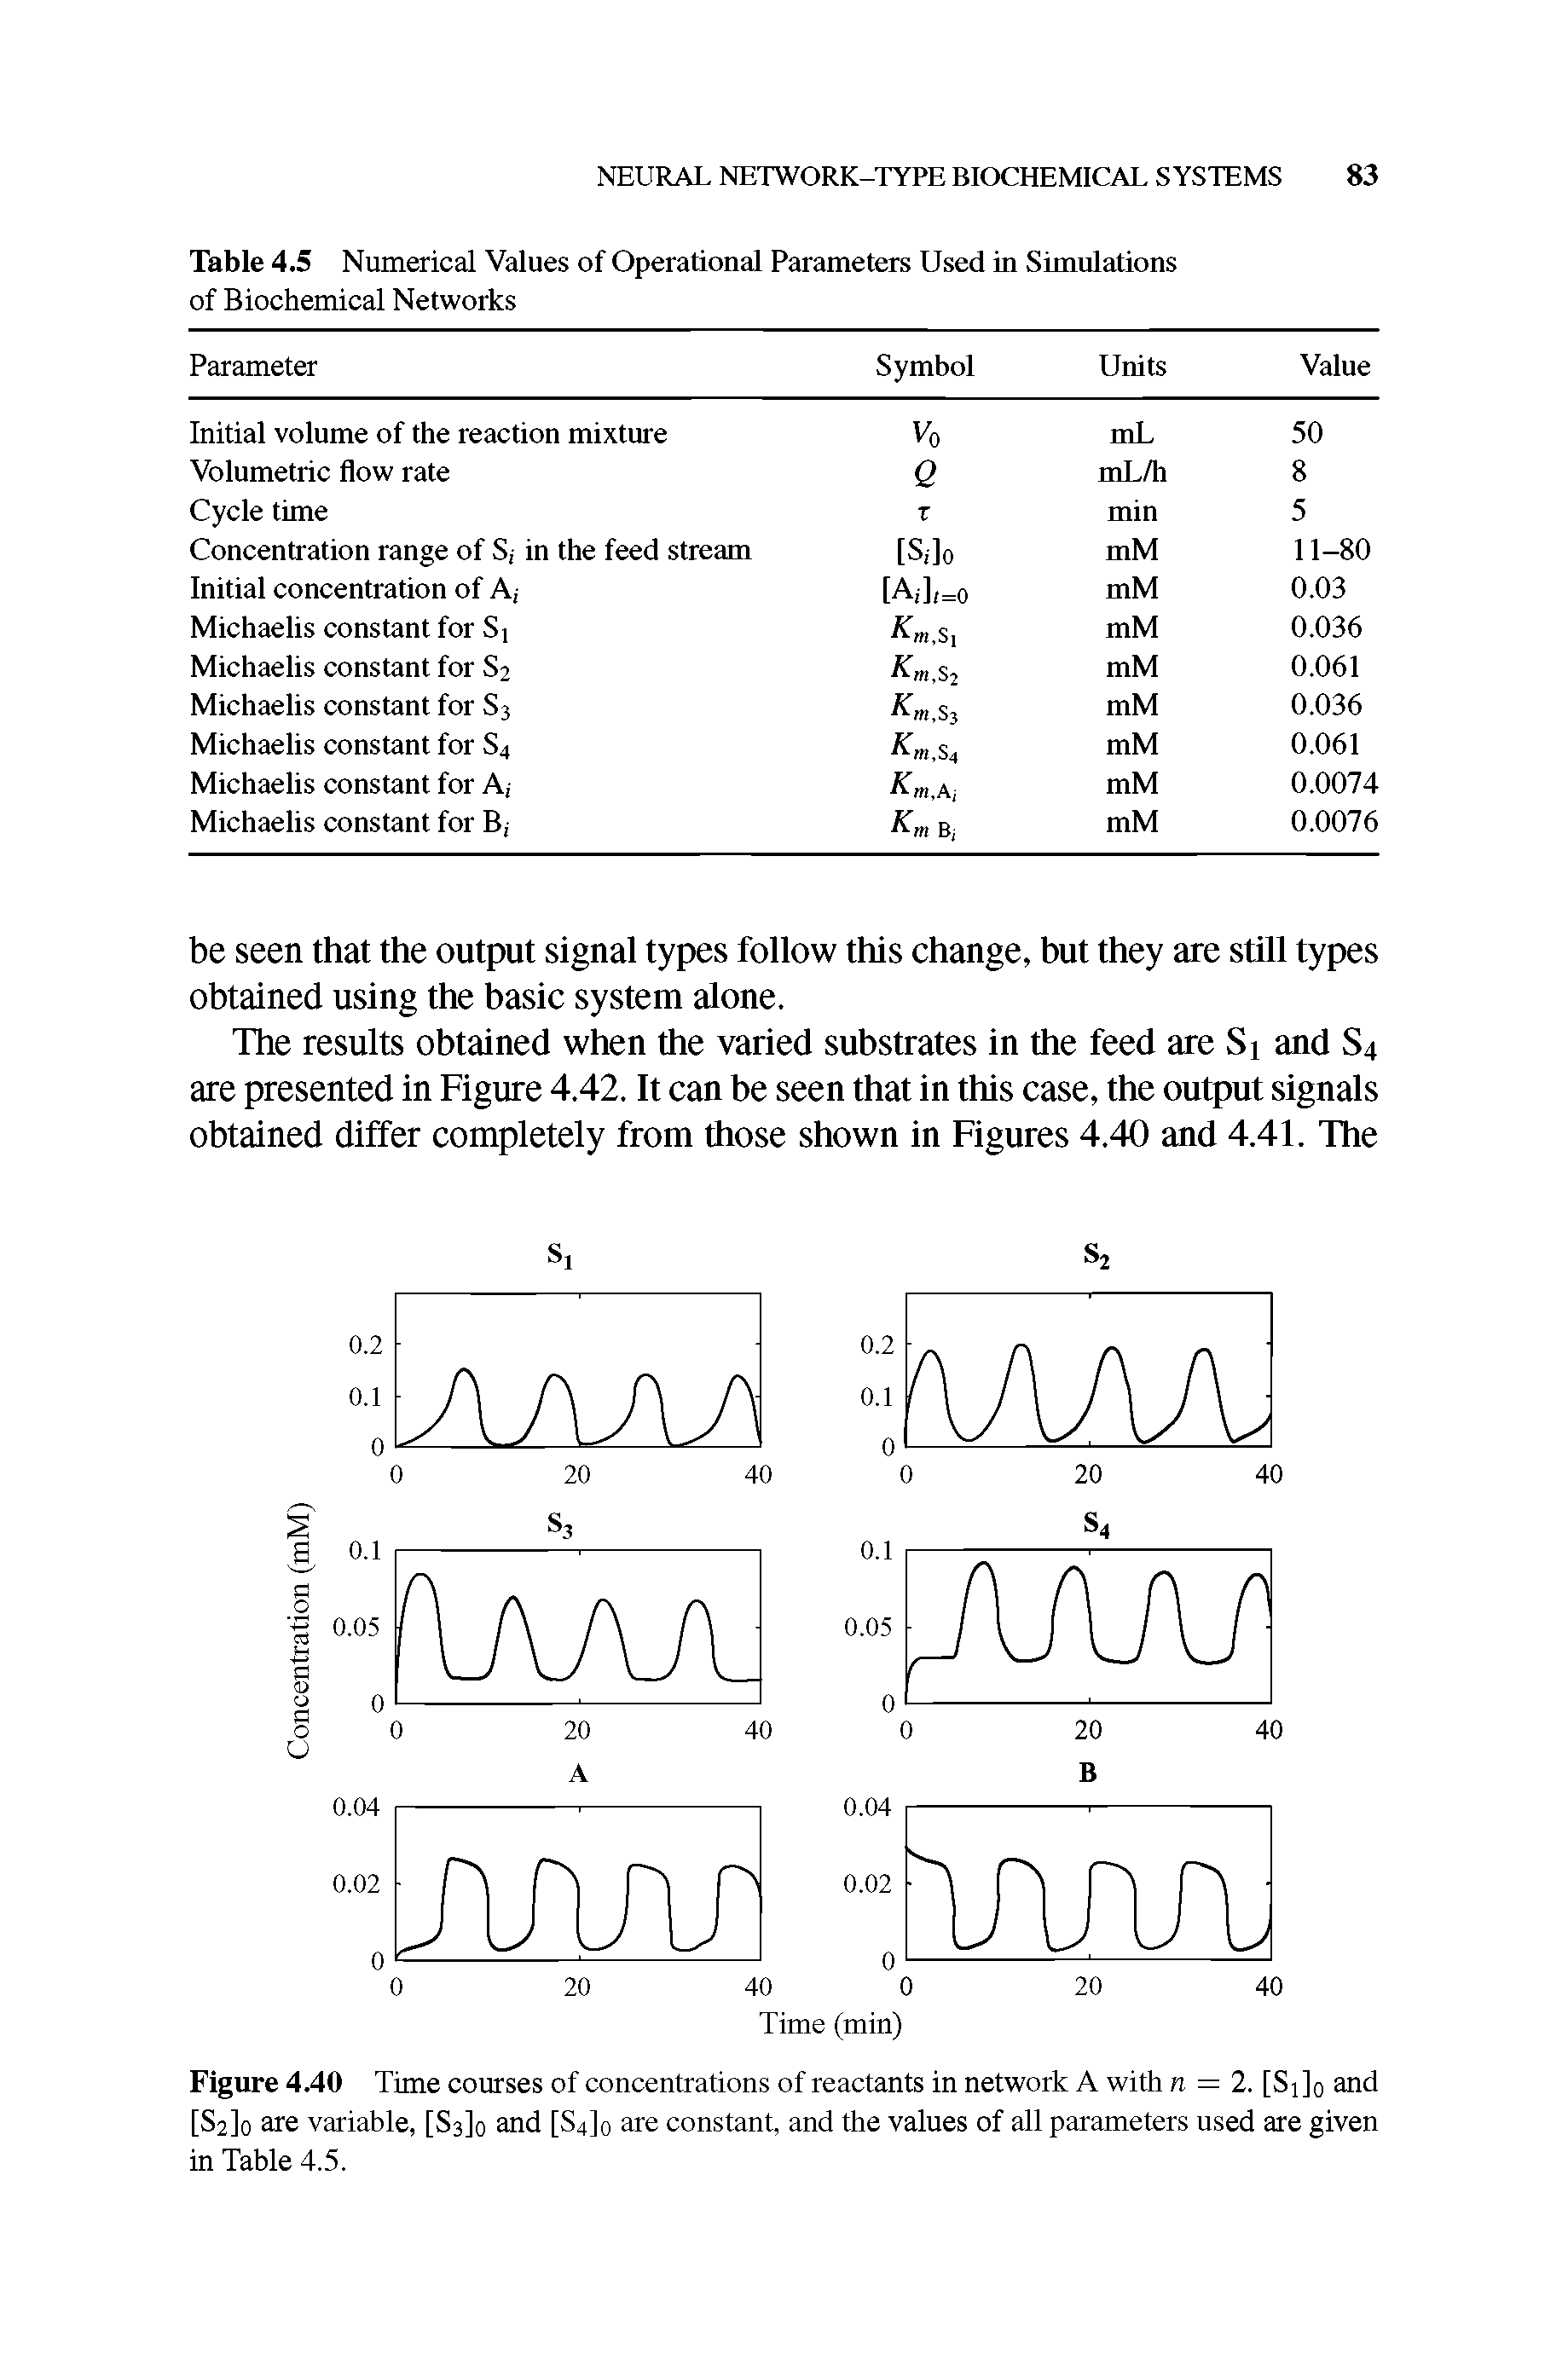 Table 4.5 Numerical Values of Operational Parameters Used in Simnlations of Biochemical Networks...